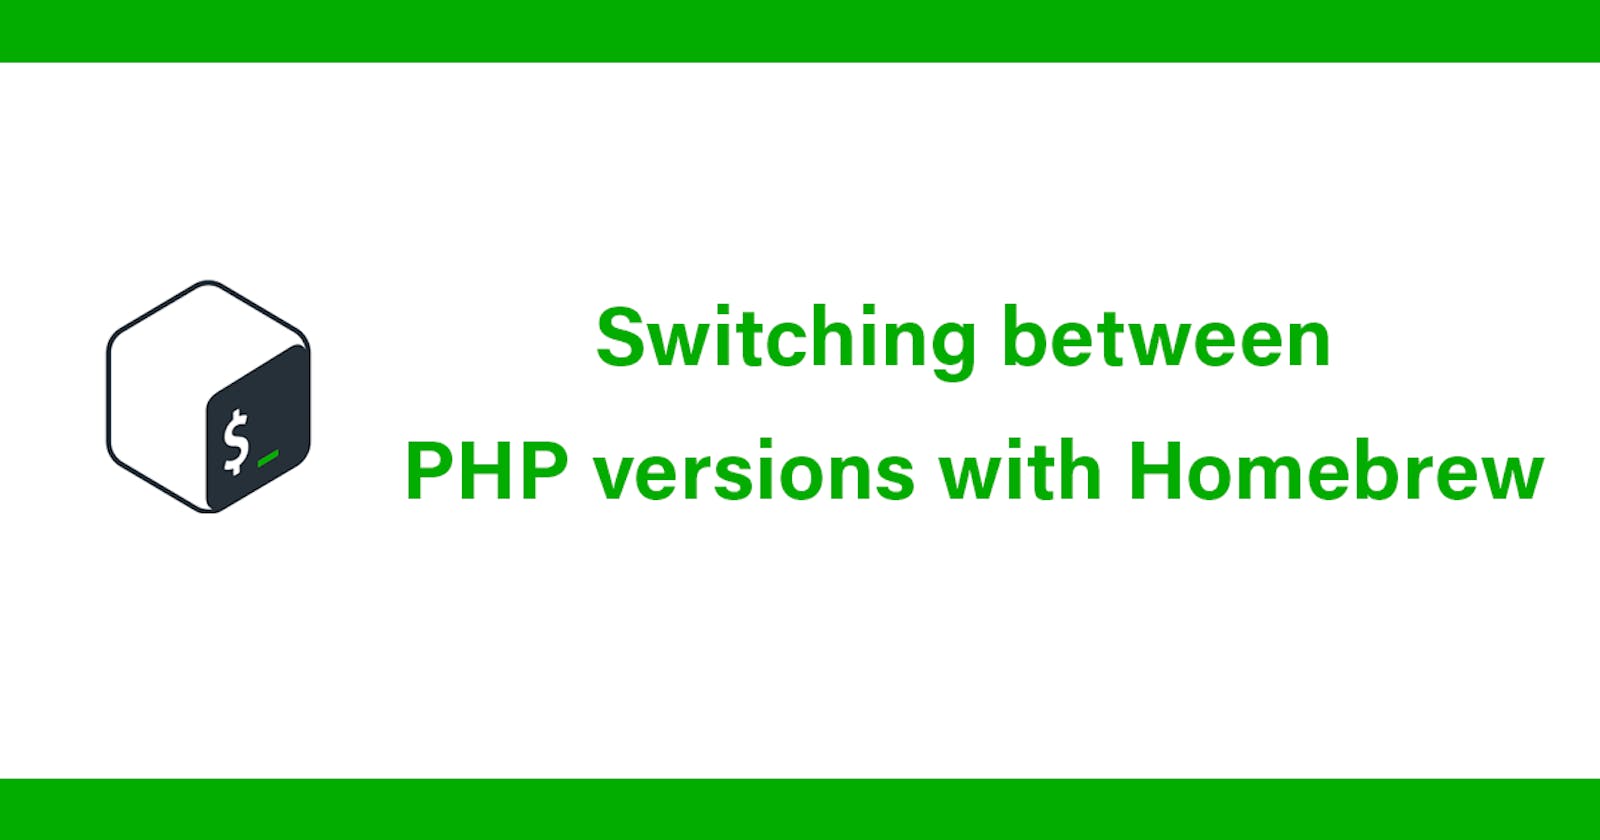 Switching between PHP versions with Homebrew